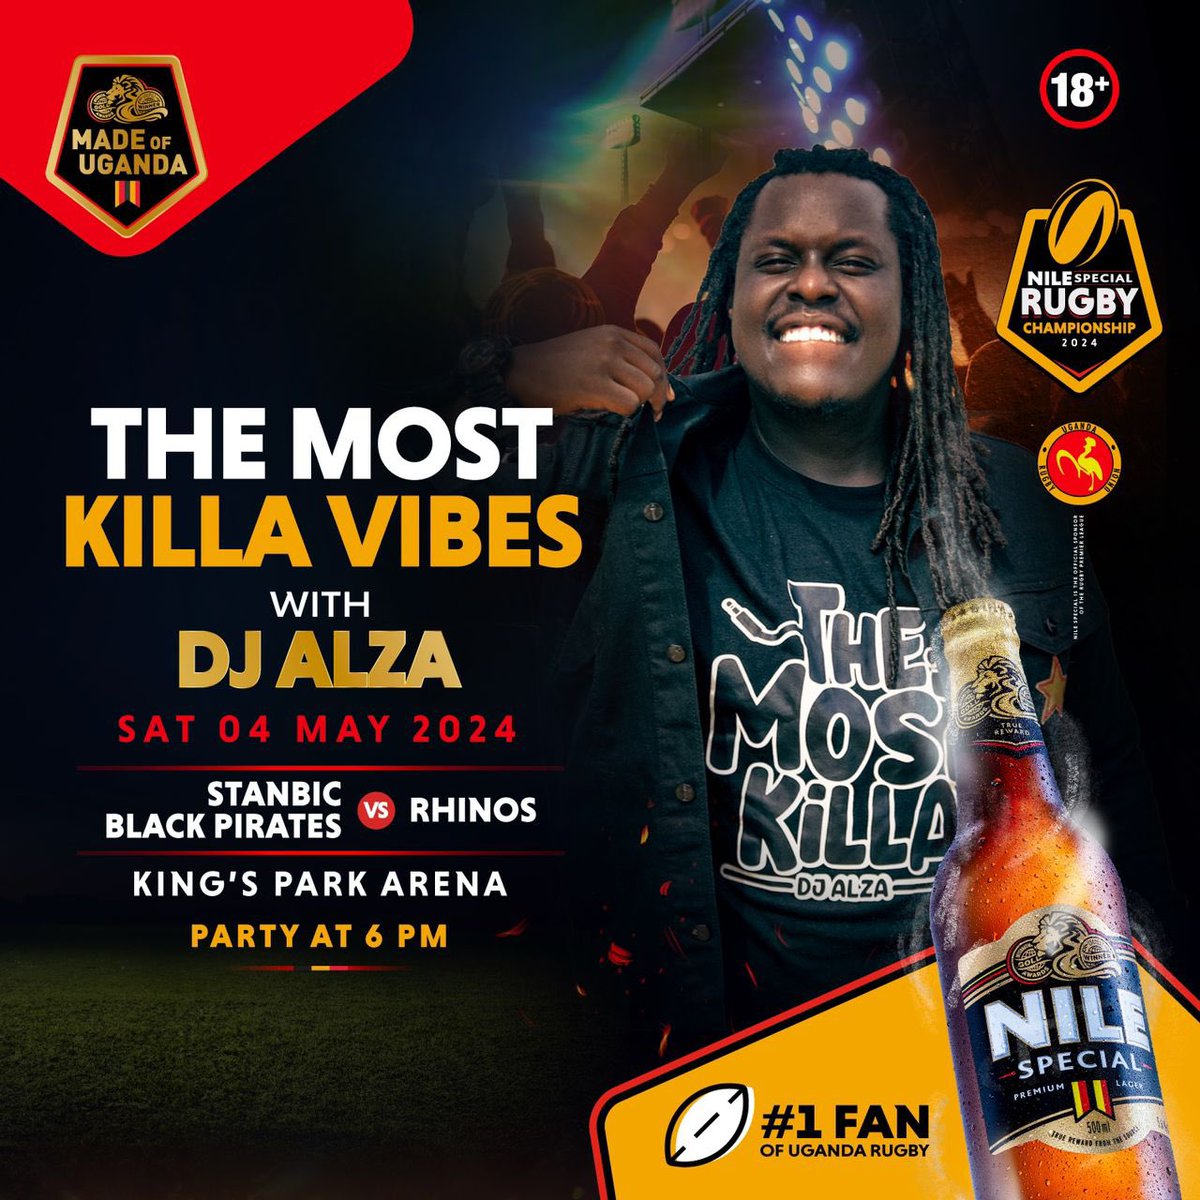 A Killa sato at @TheRugbyChill , we don’t see why not💁🏾 @deejay_Alza 😎will be the Champion of the Sunrisecup, show up for derby day this Saturday as @piratesrugbyUG takes on @RhinosRugbyUG in an electric fixture 🔥 #NilespecialRugby #TheRugbyChill